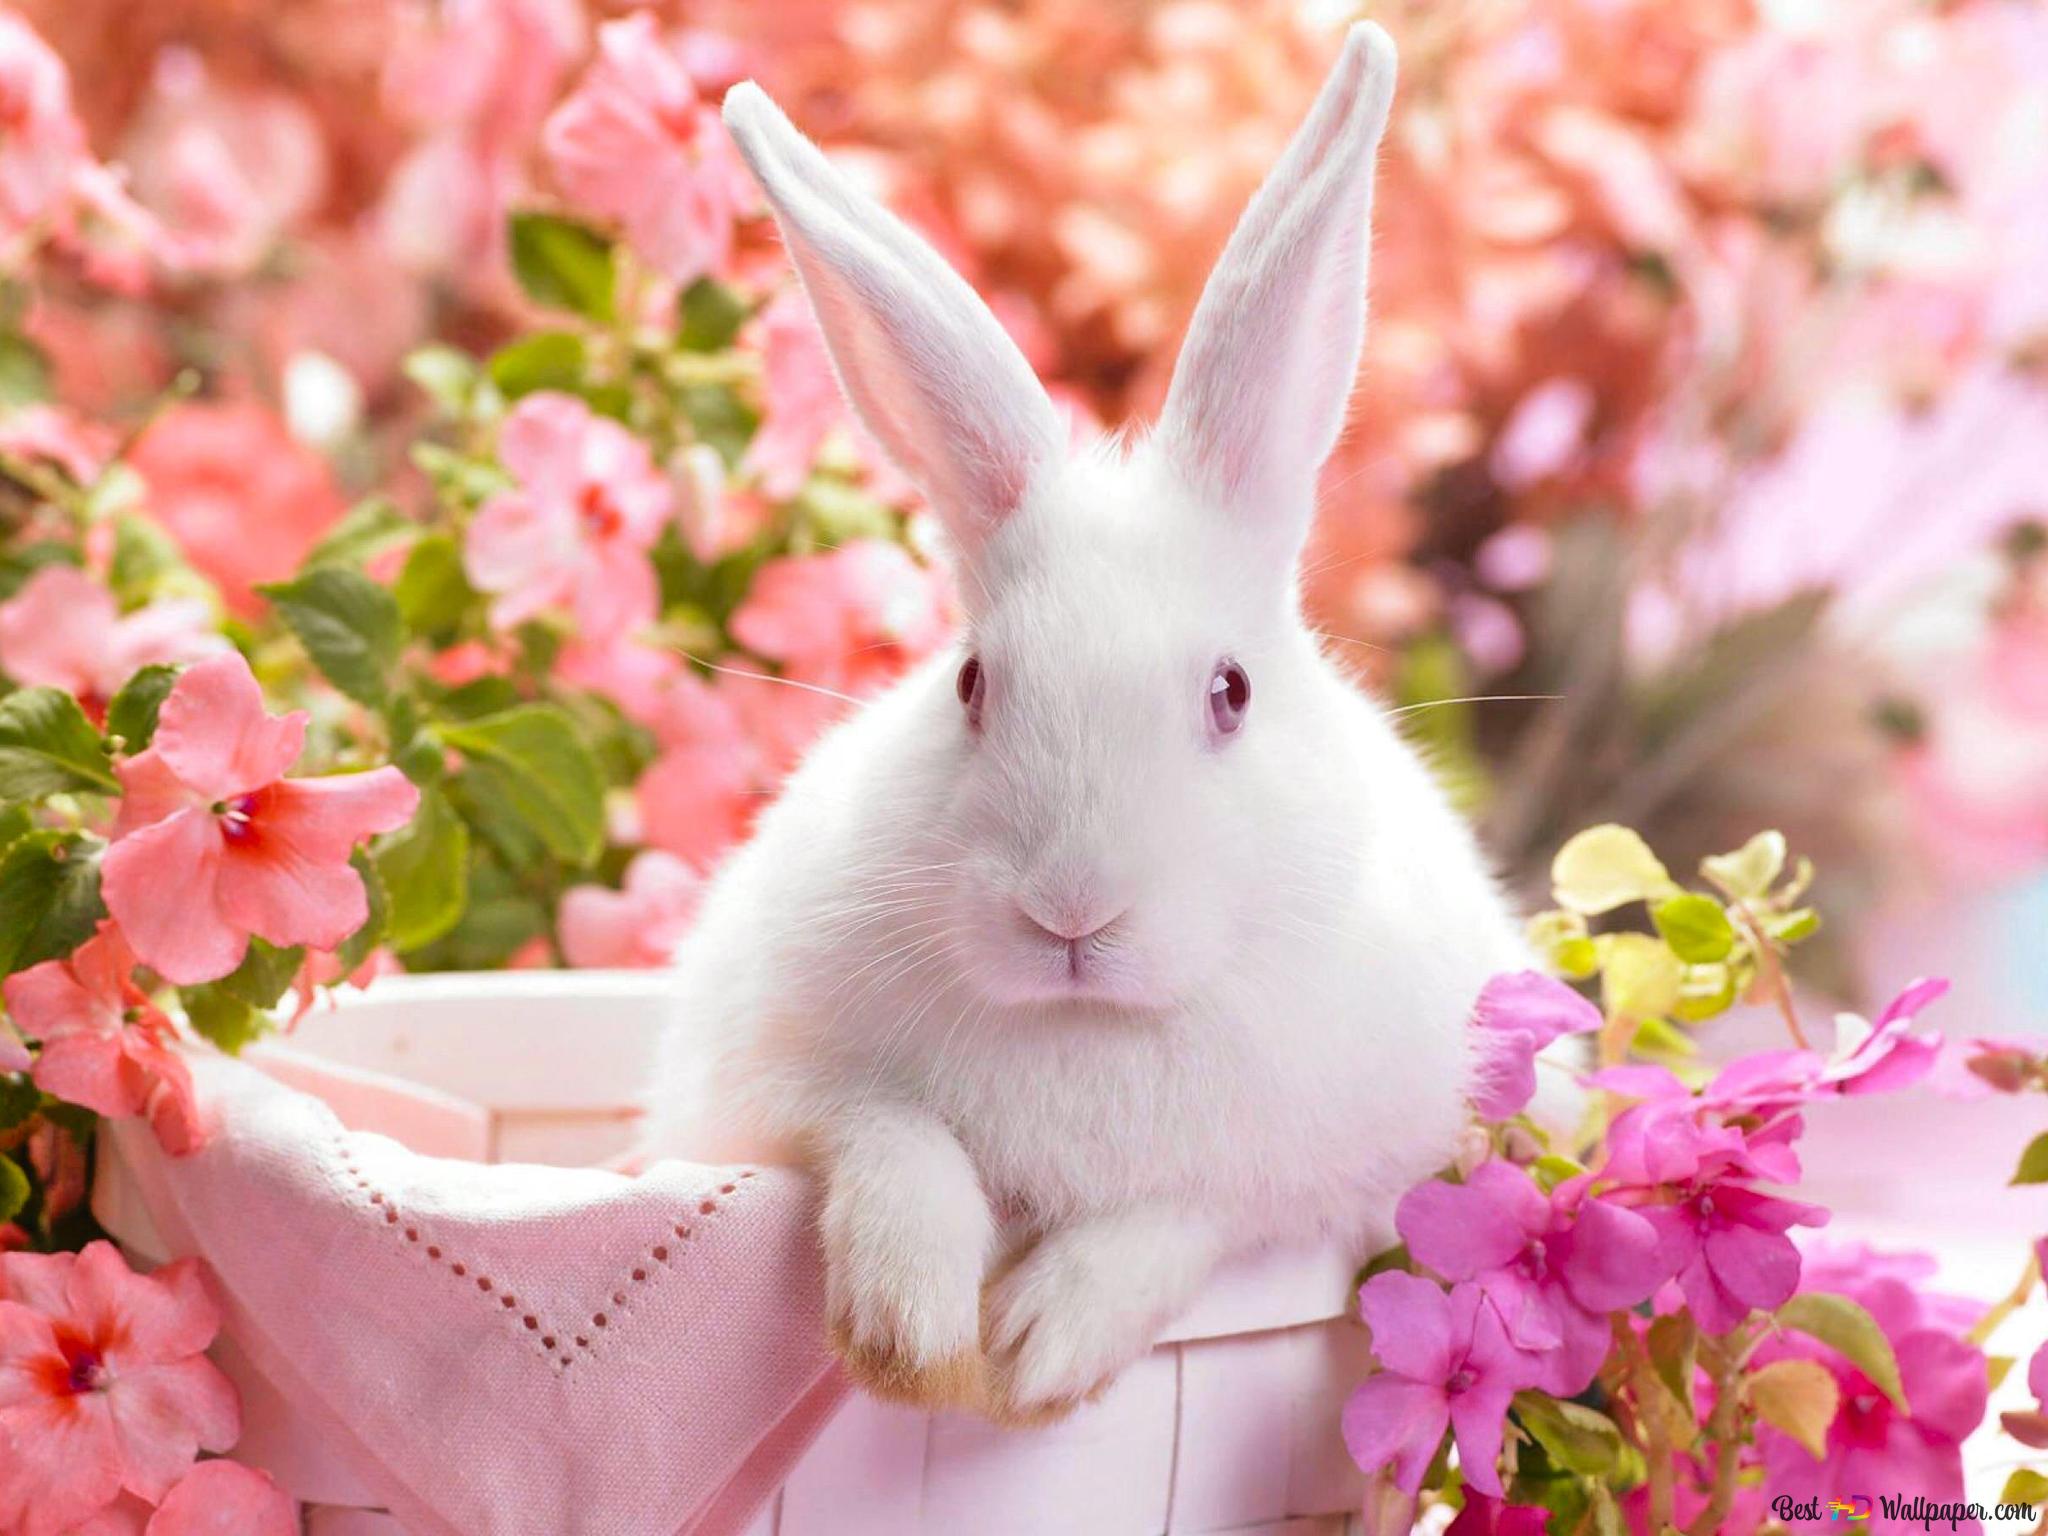 White bunny surrounded by pink and purple flowers 2K wallpaper download